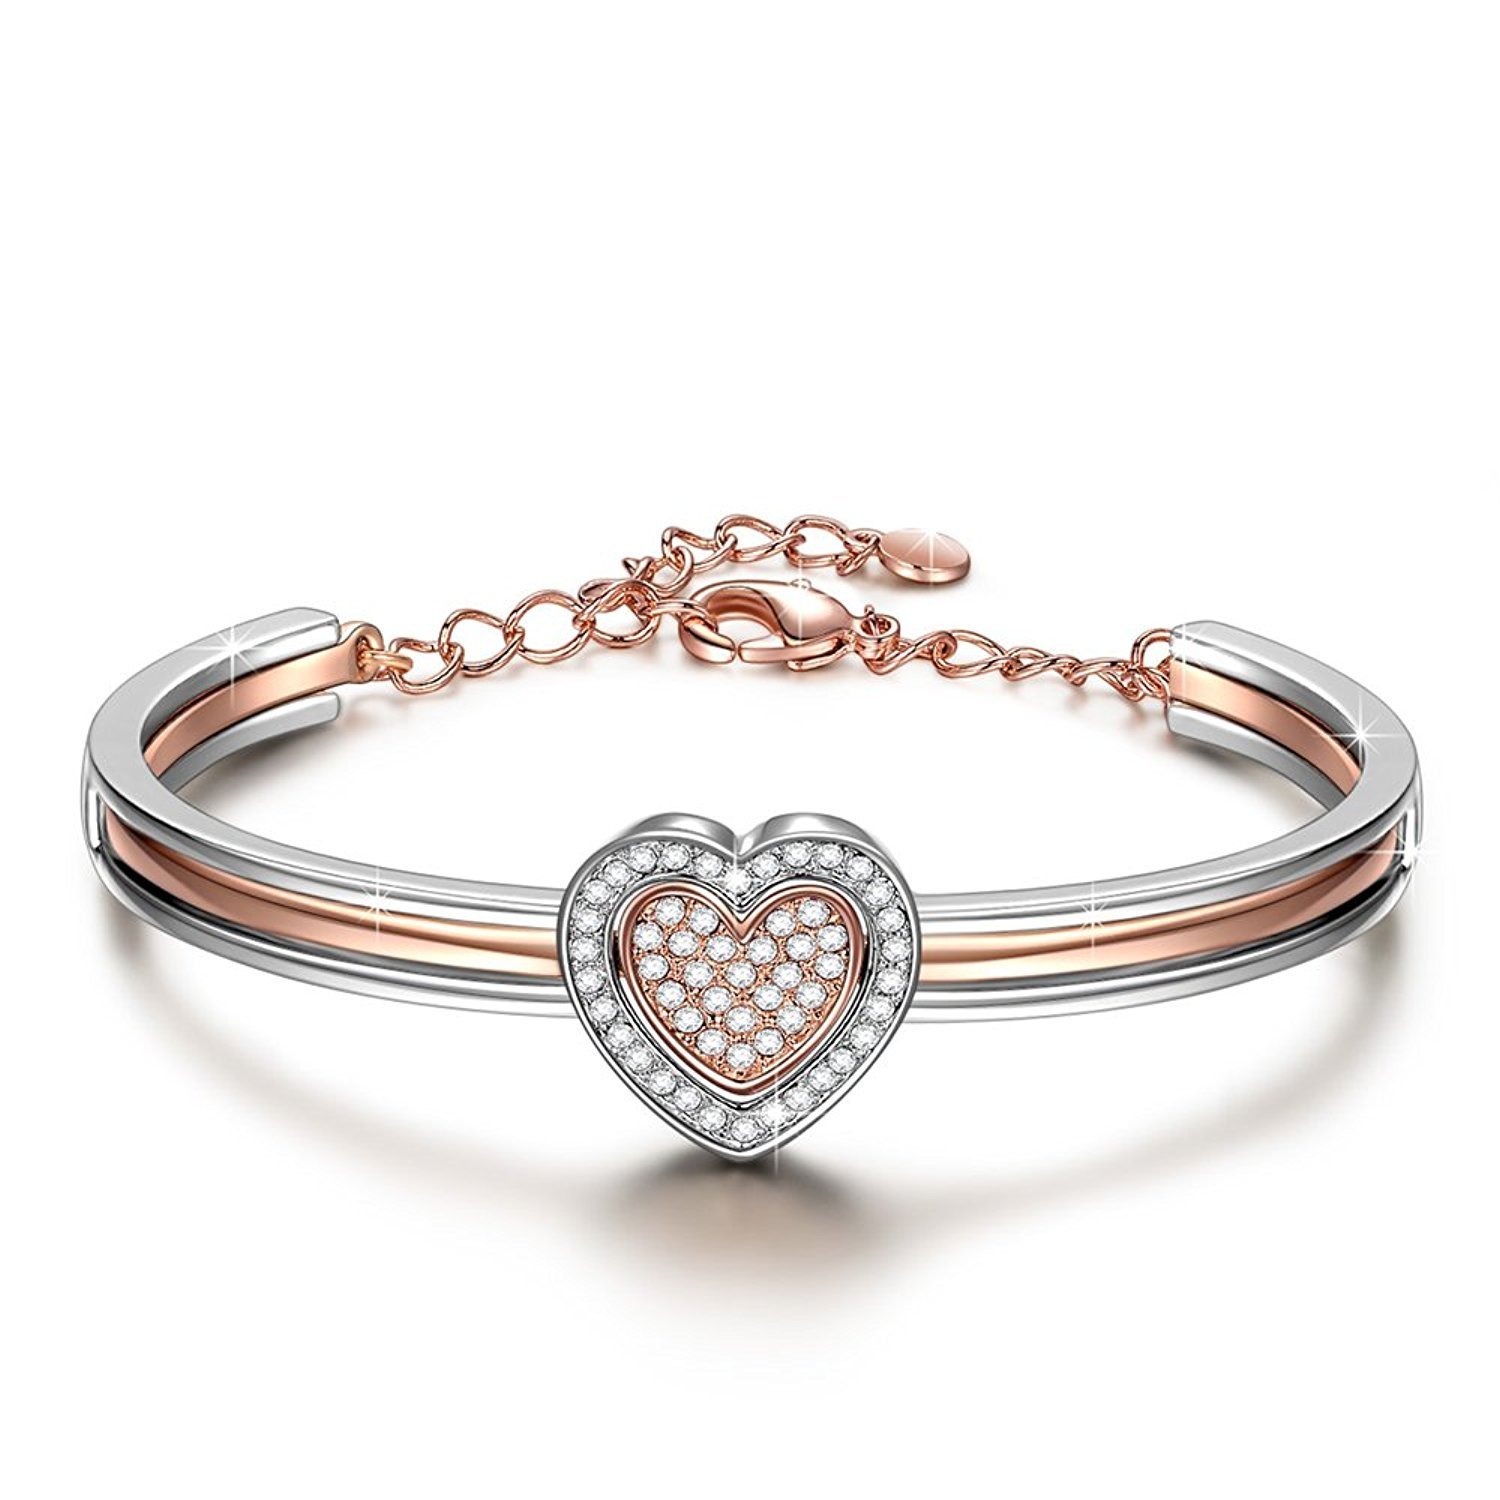 ♥Valentines Day Gifts♥ J.NINA "Cupid Heart" 7 Inches Rose-Gold Plated Heart Comb - $59.95